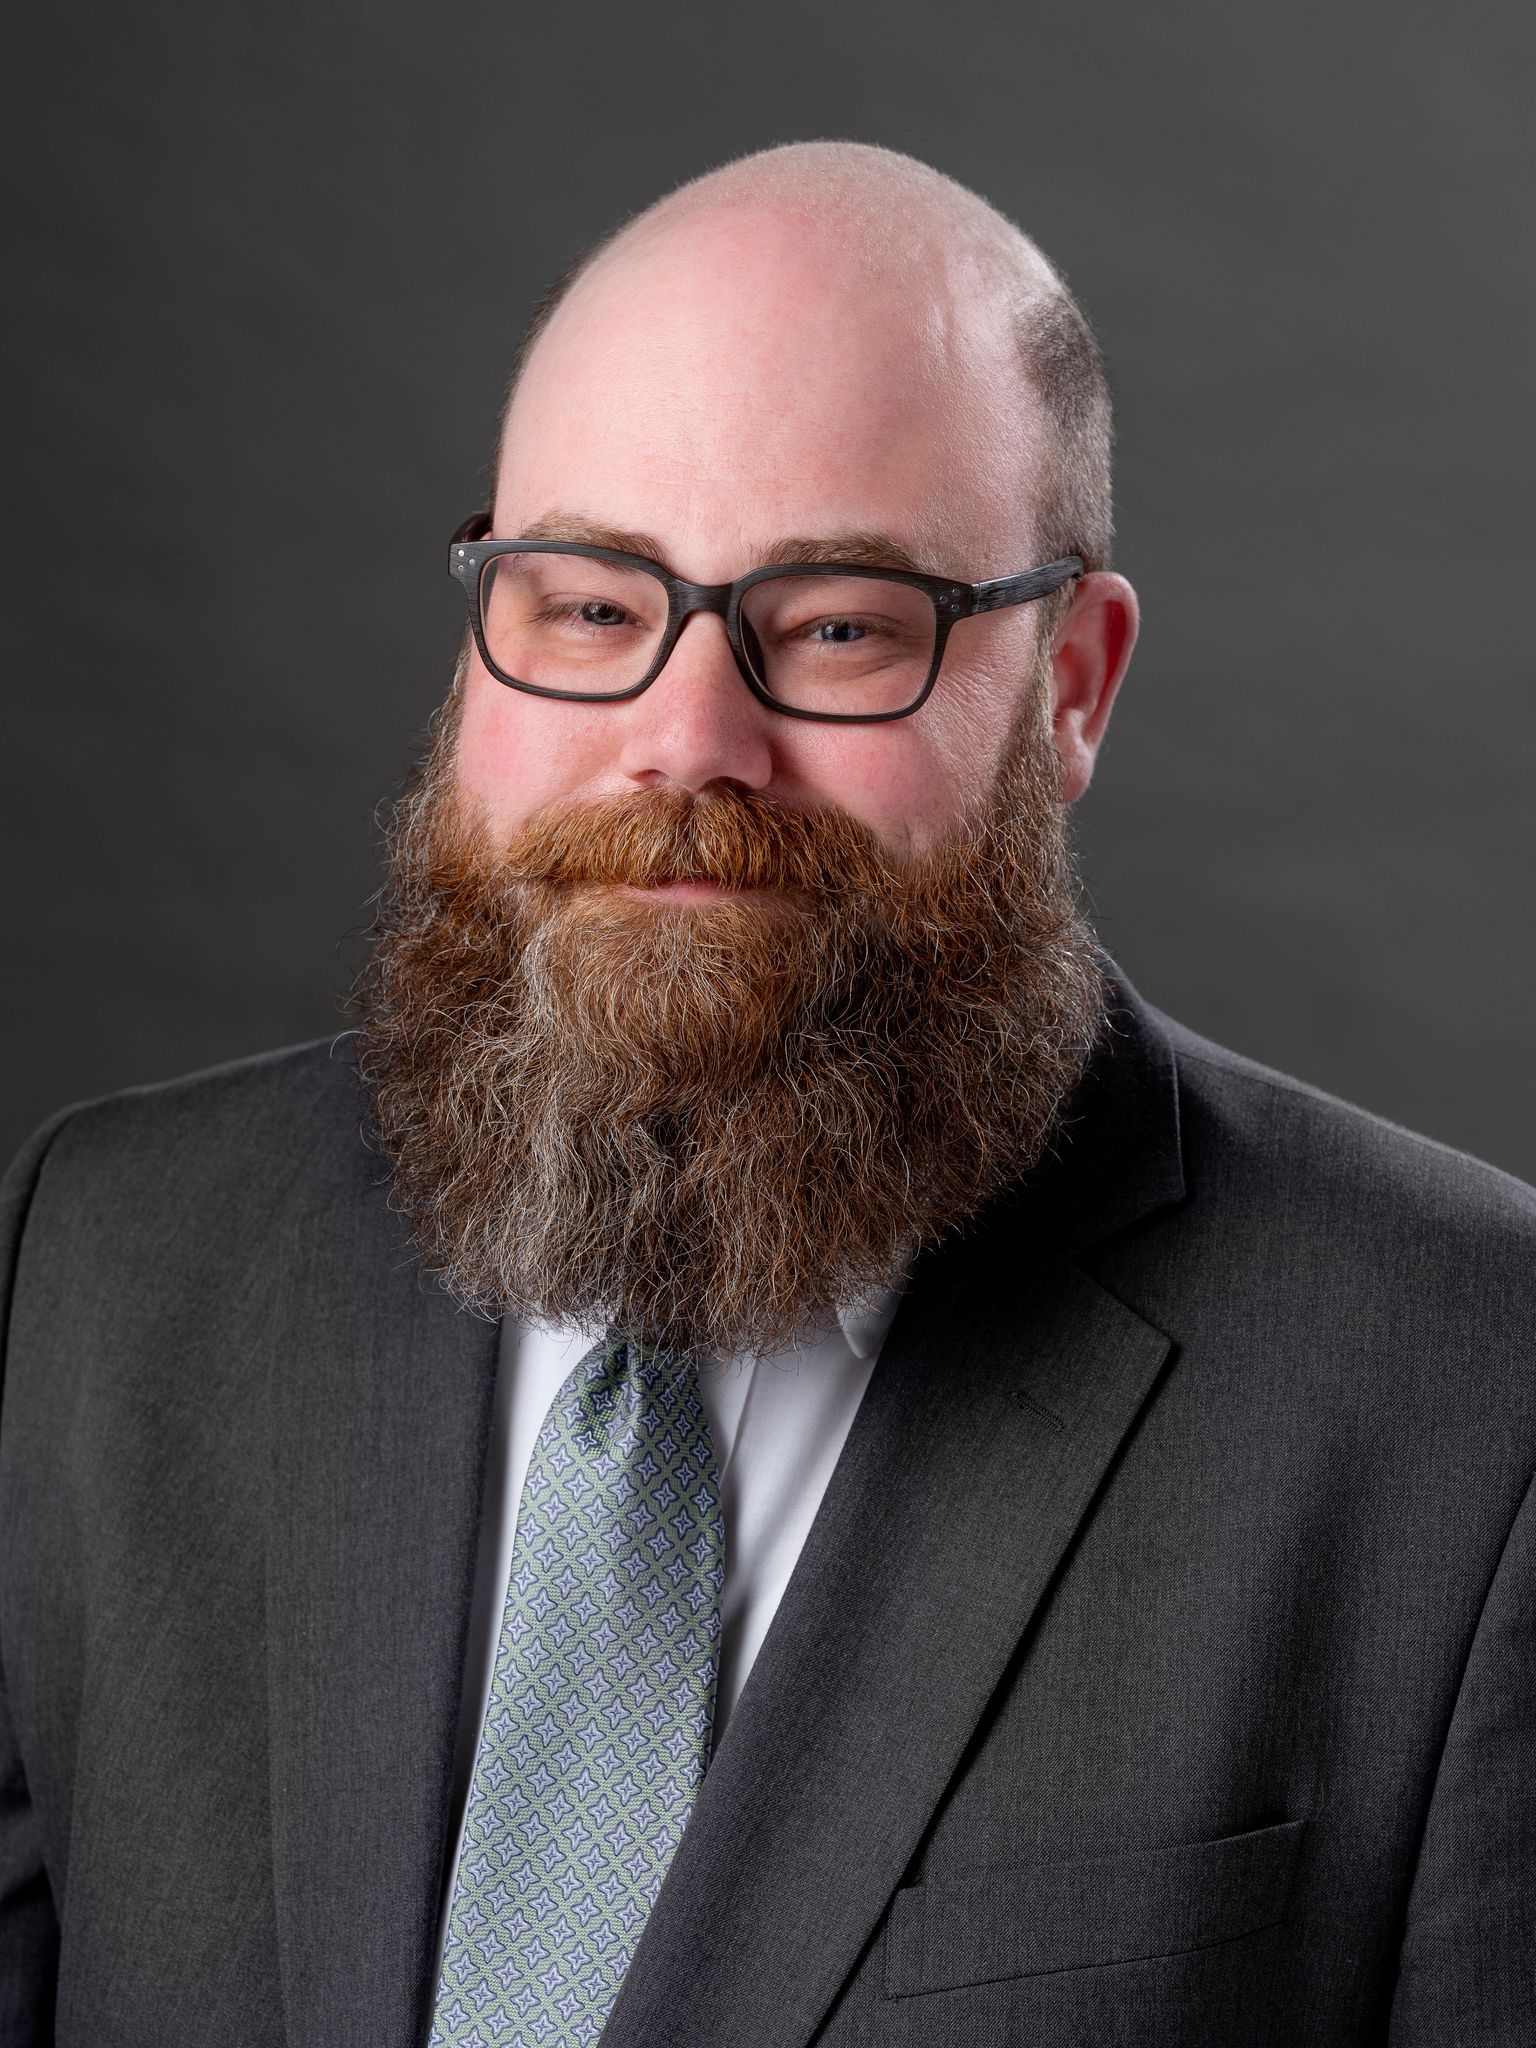 Kevin McKeown, Funeral Home Director in Corning NY